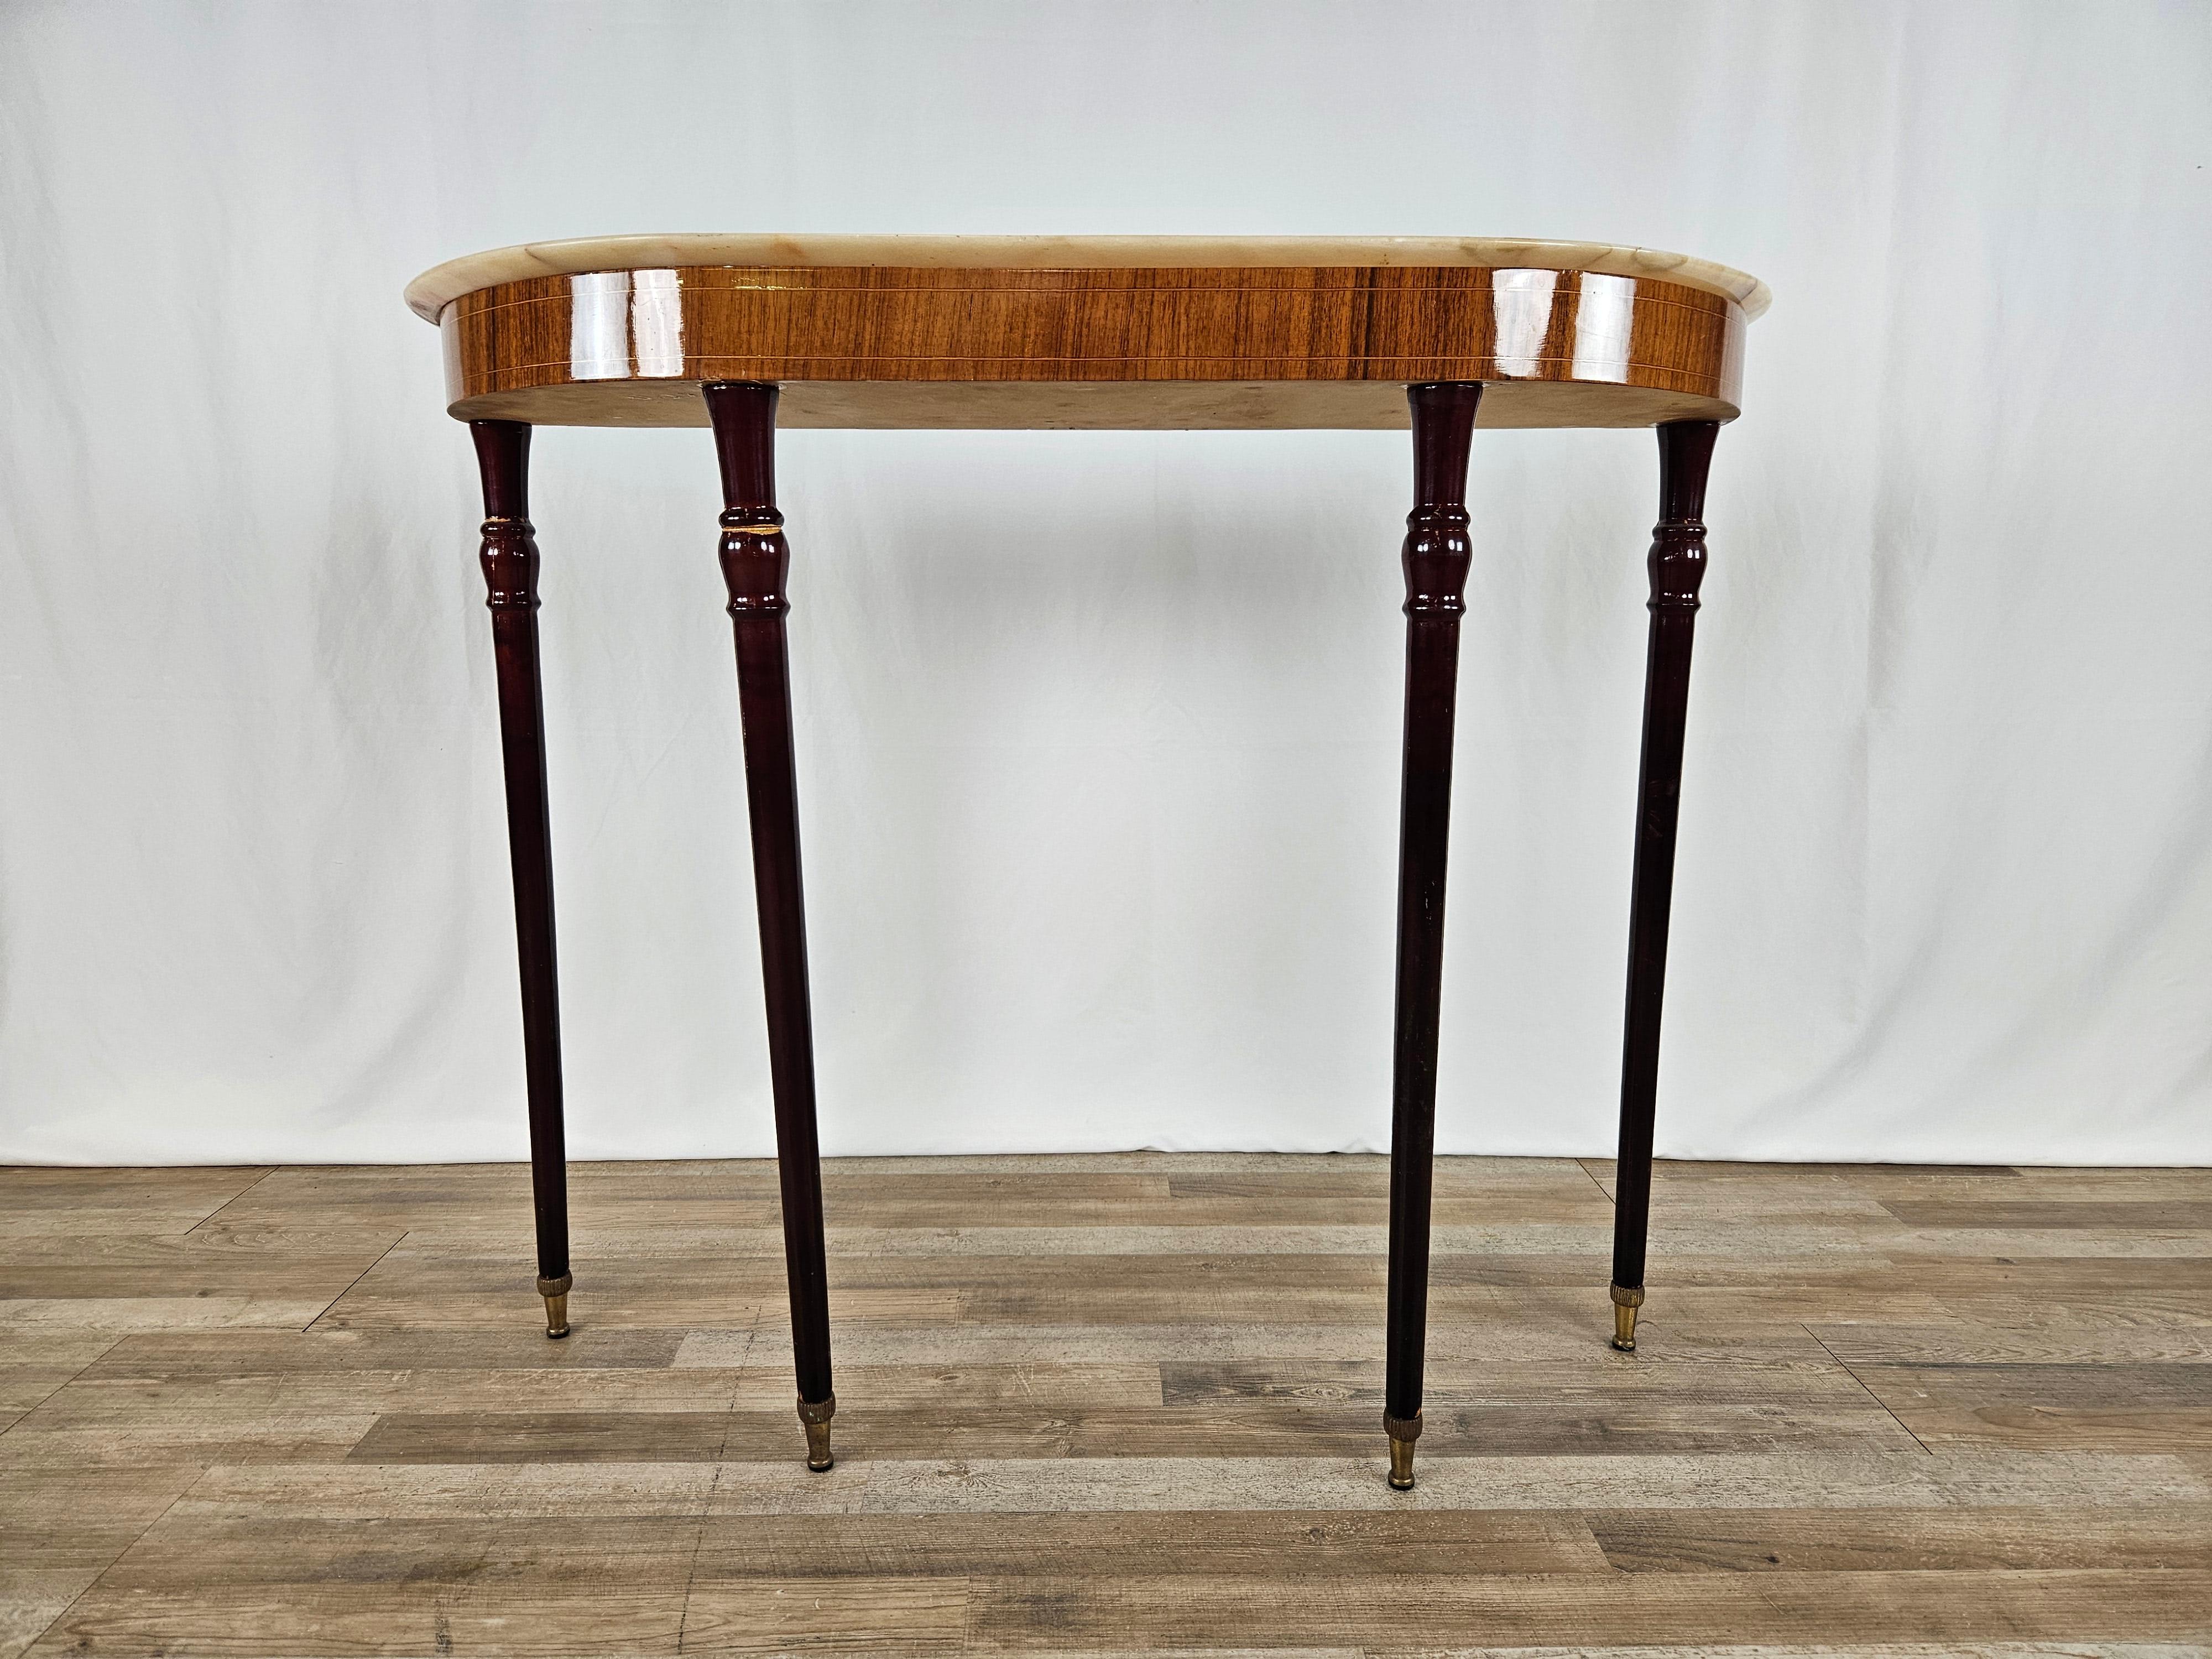 1950s-style entryway console table with marble top and four high legs with brass ferrules.

As visible from the photos the second leg is crooked but the cabinet is stable.
Marble marbled in right rear corner.